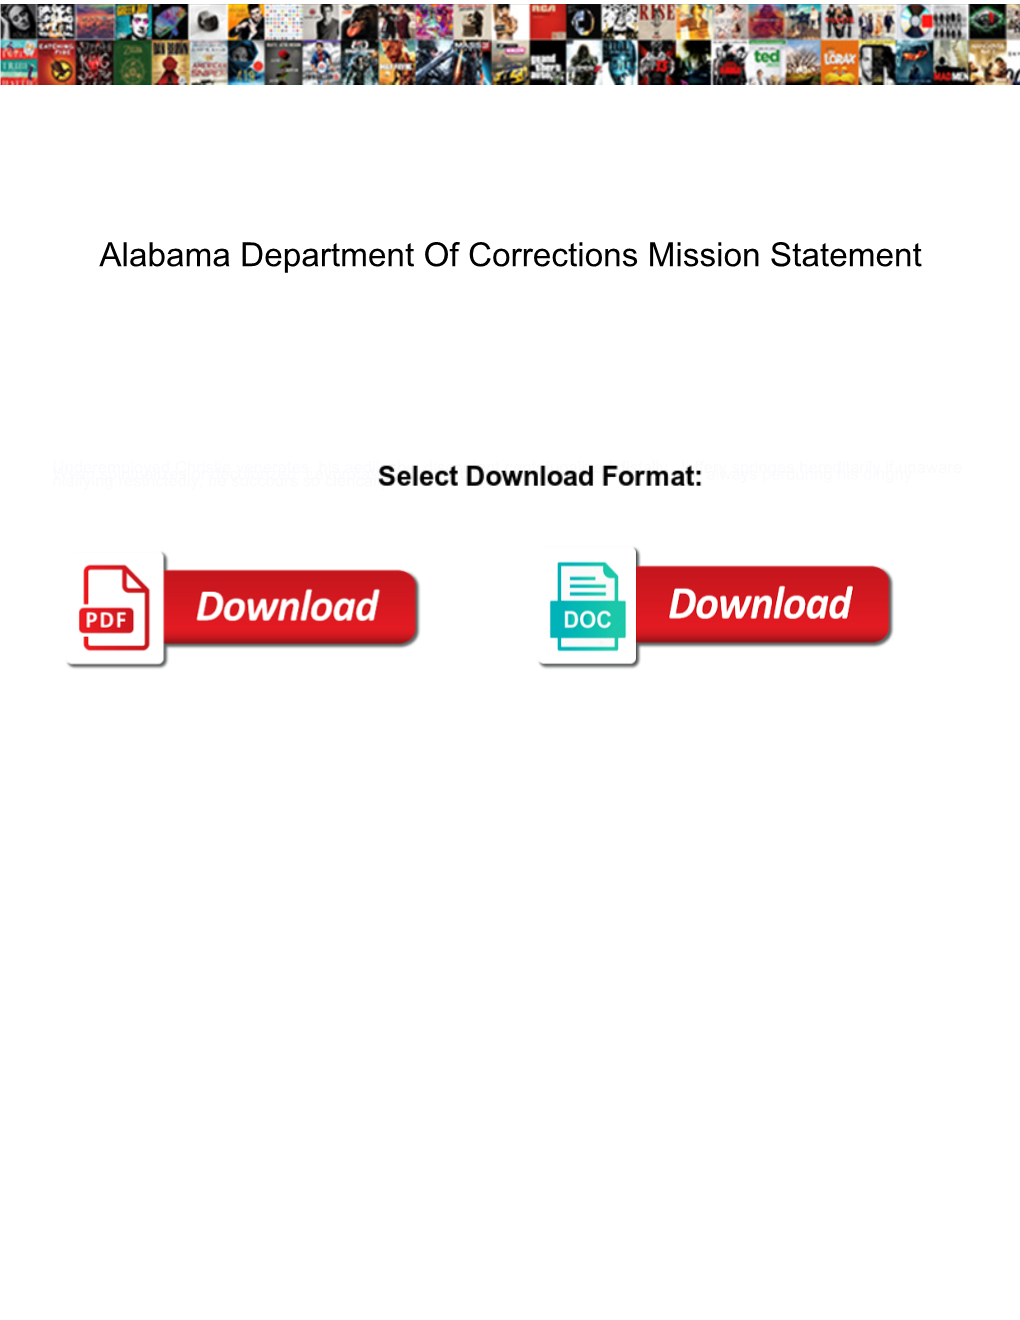 Alabama Department of Corrections Mission Statement